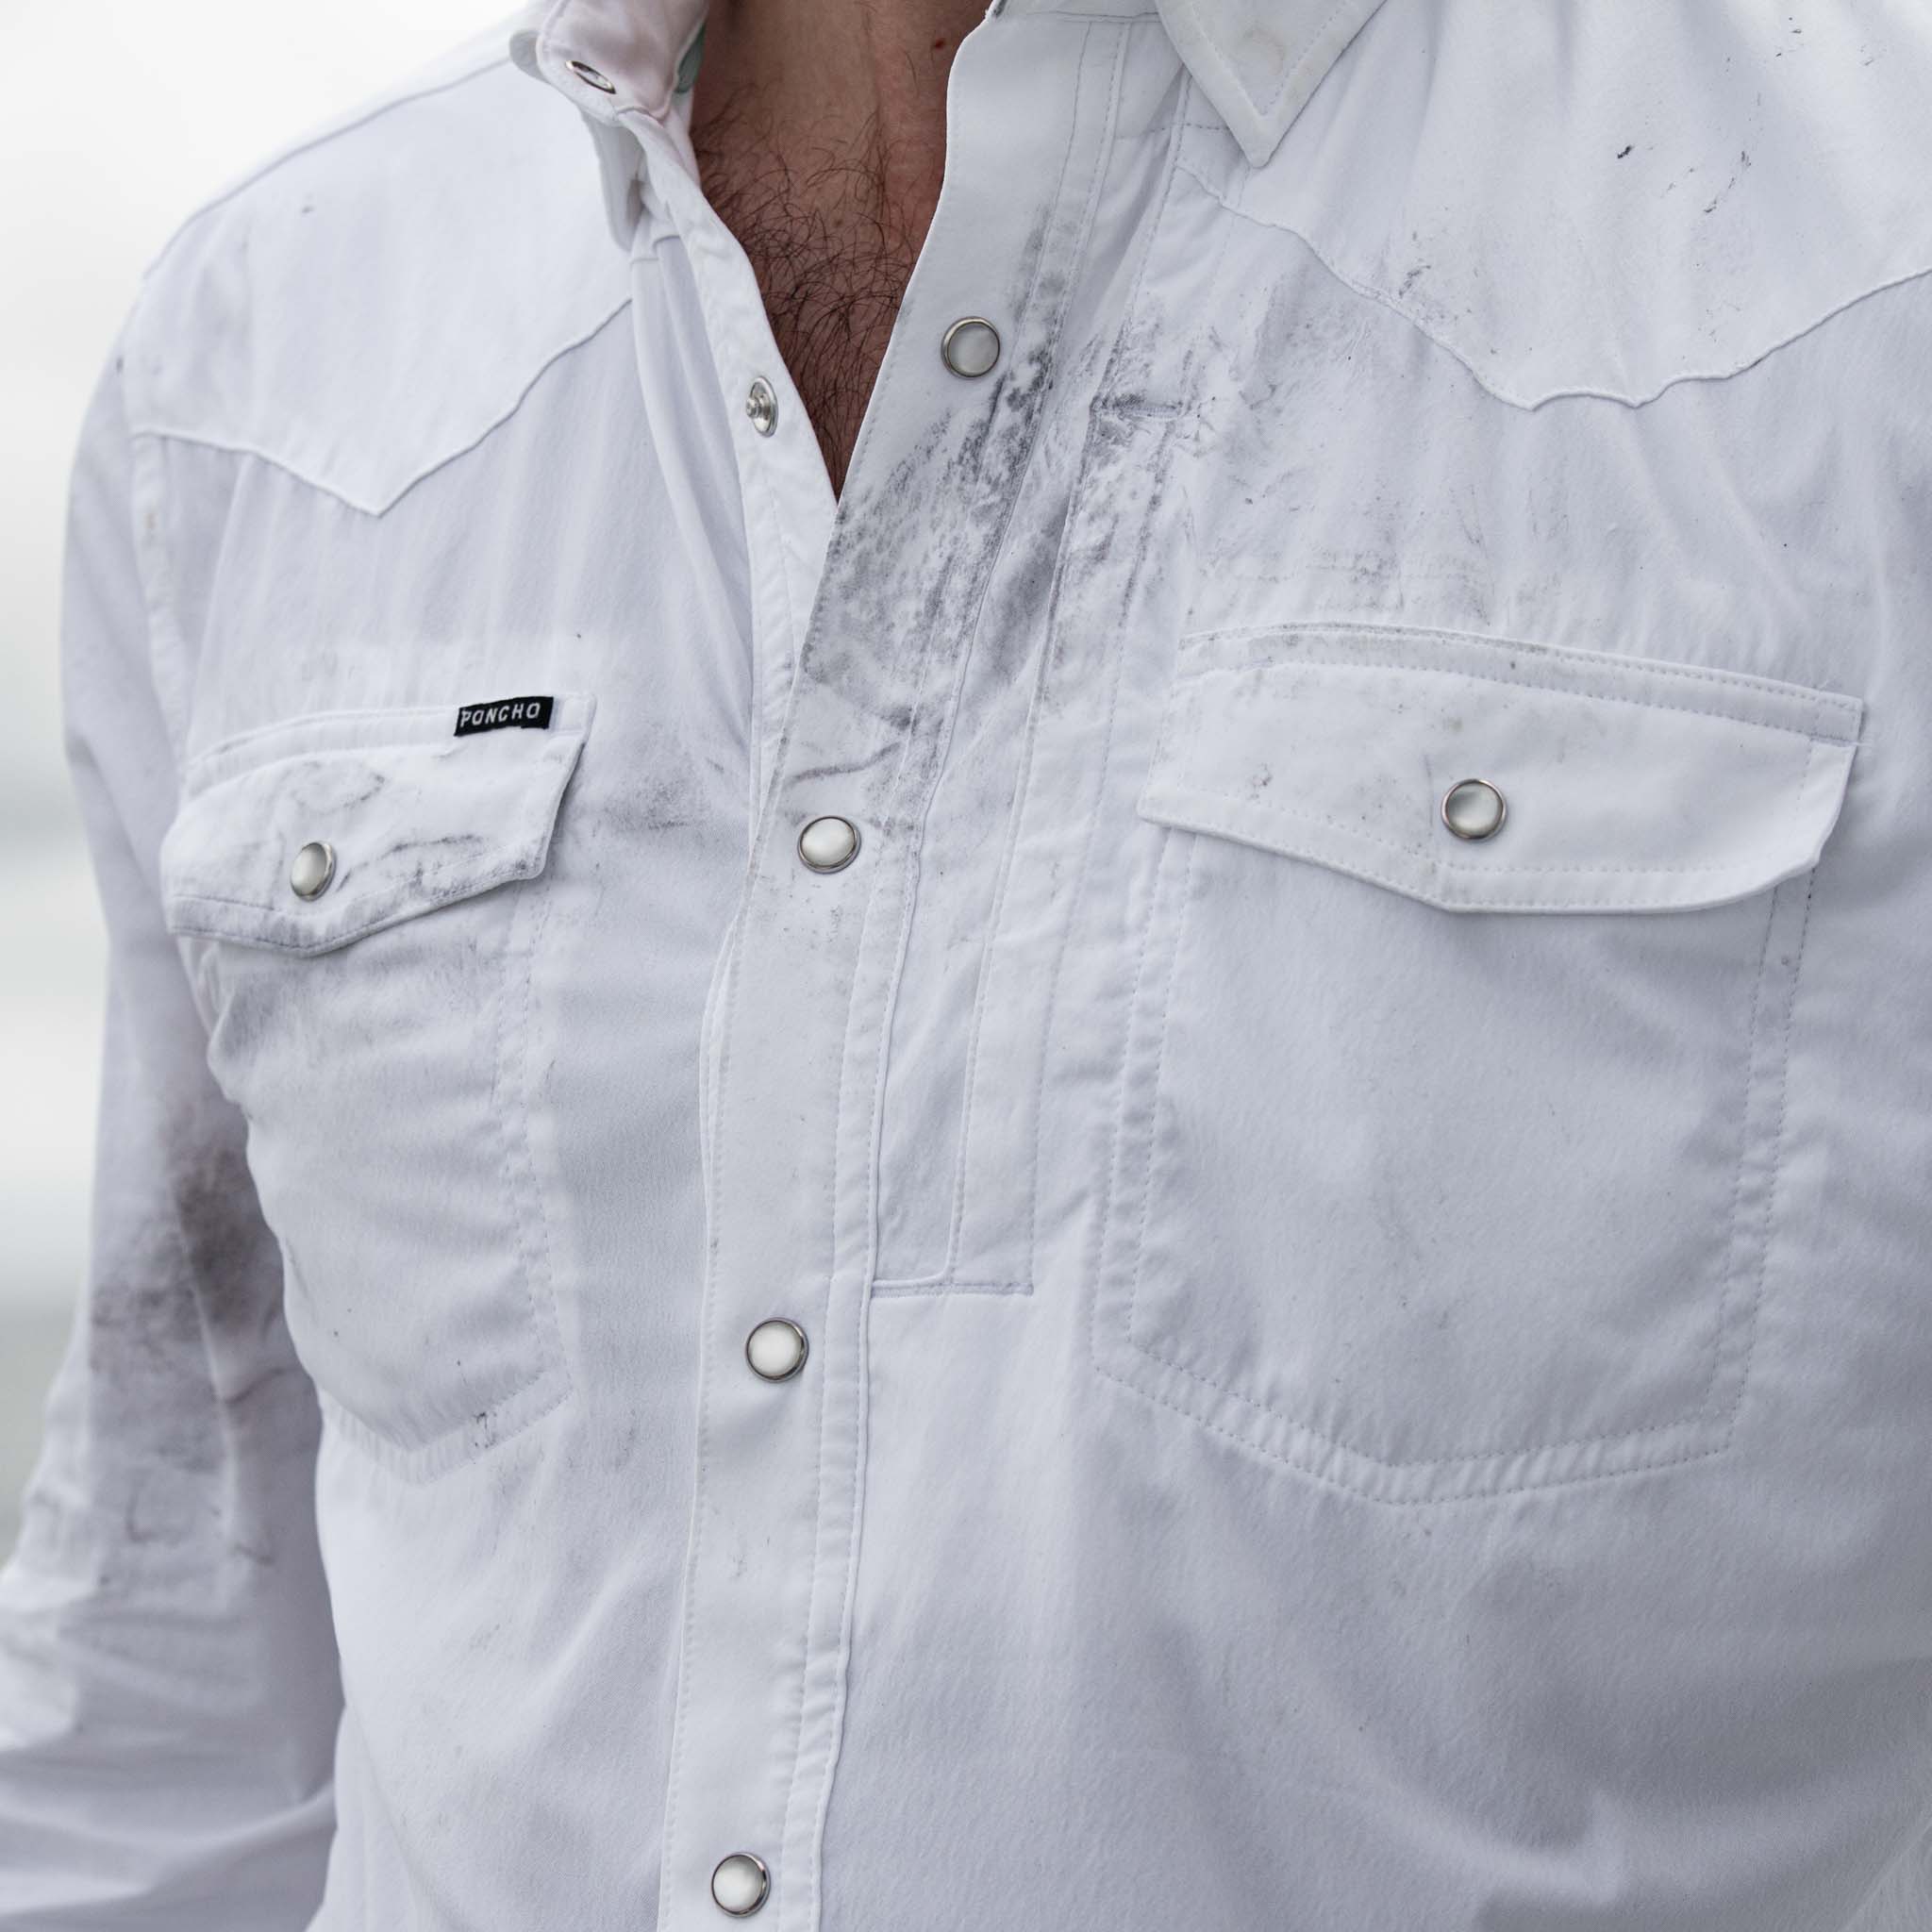 Close up of fabric of long sleeve white shirt